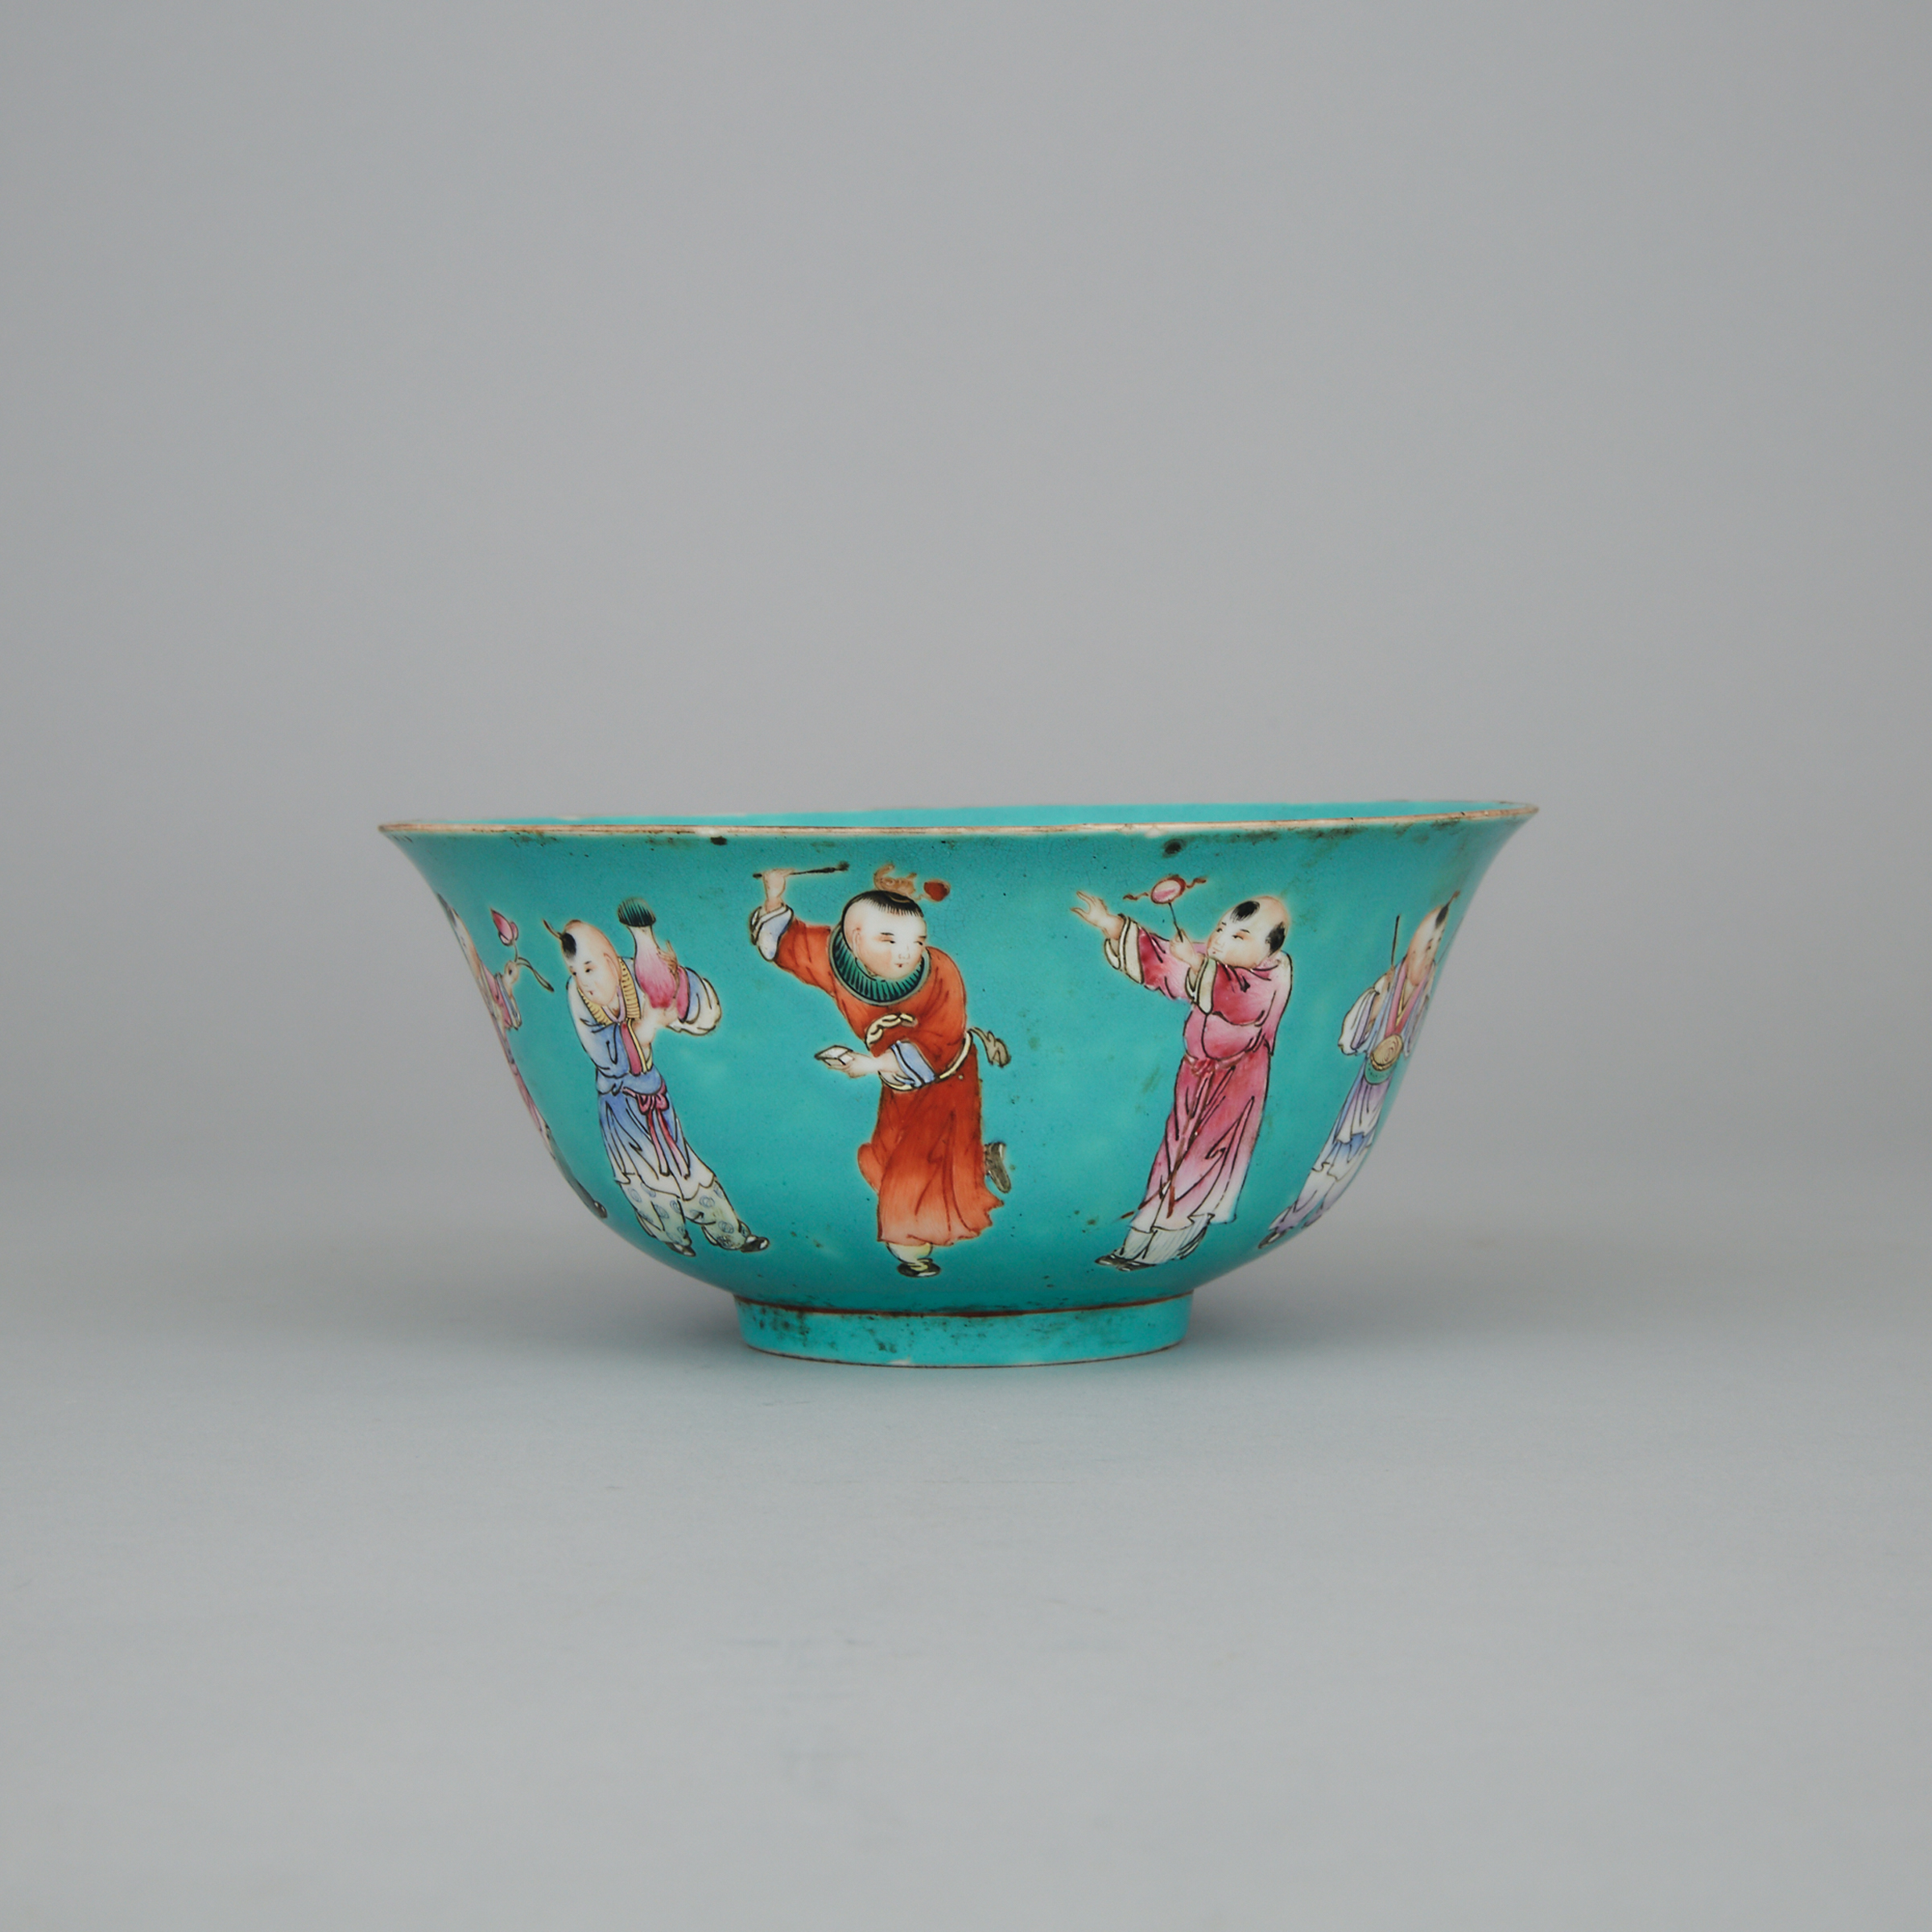 A Turquoise Ground Famille Rose 'Boys' Bowl, Republican Period